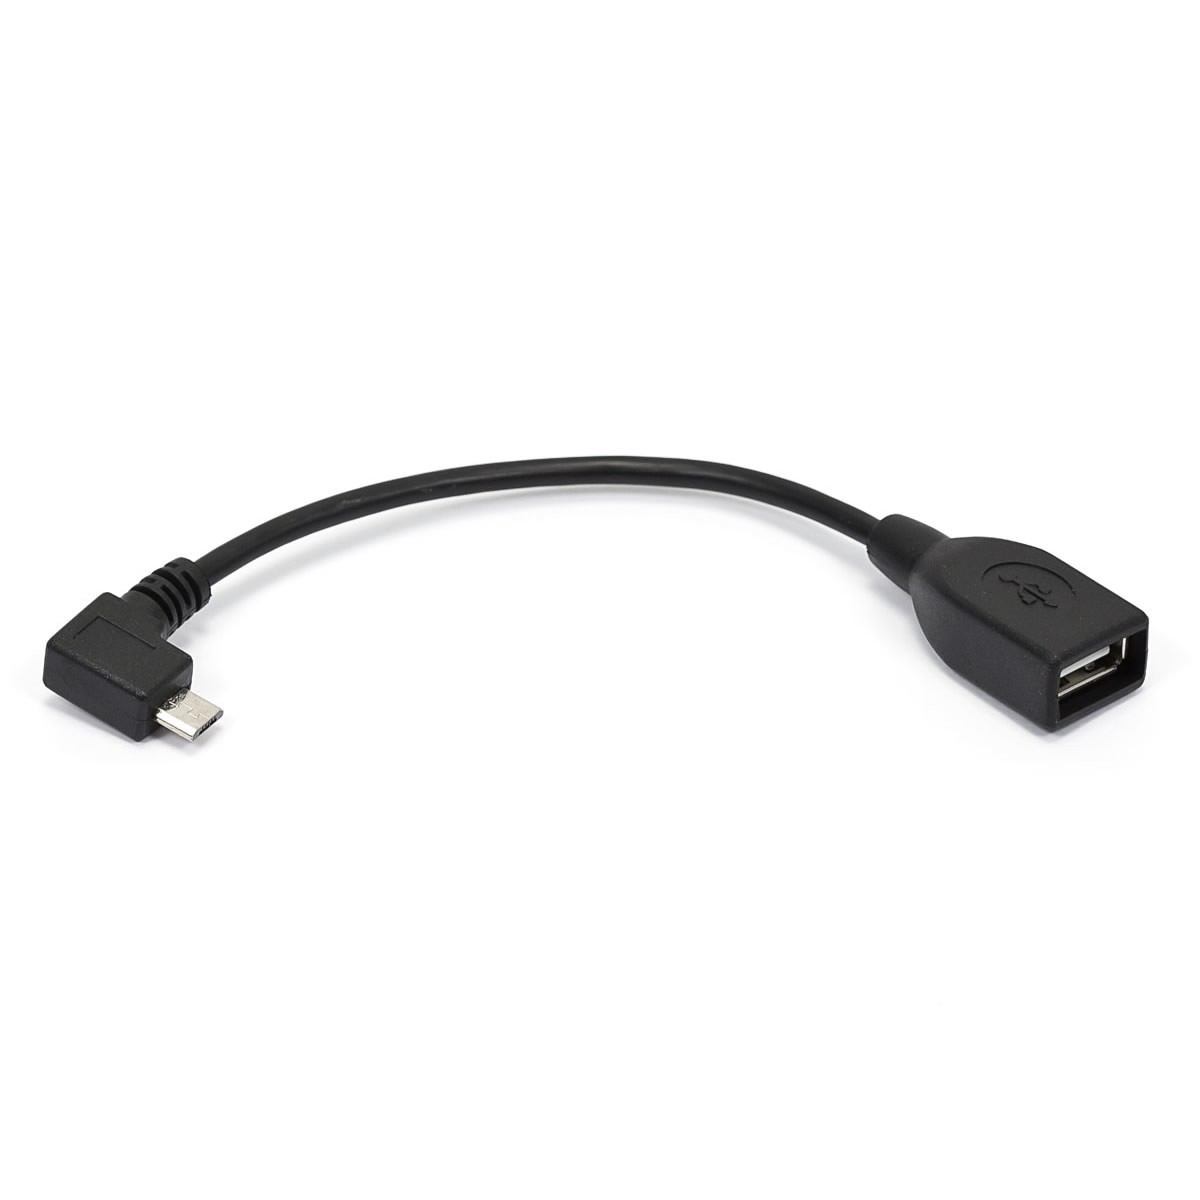 Angled Micro USB OTG to USB type A cable for Android devices